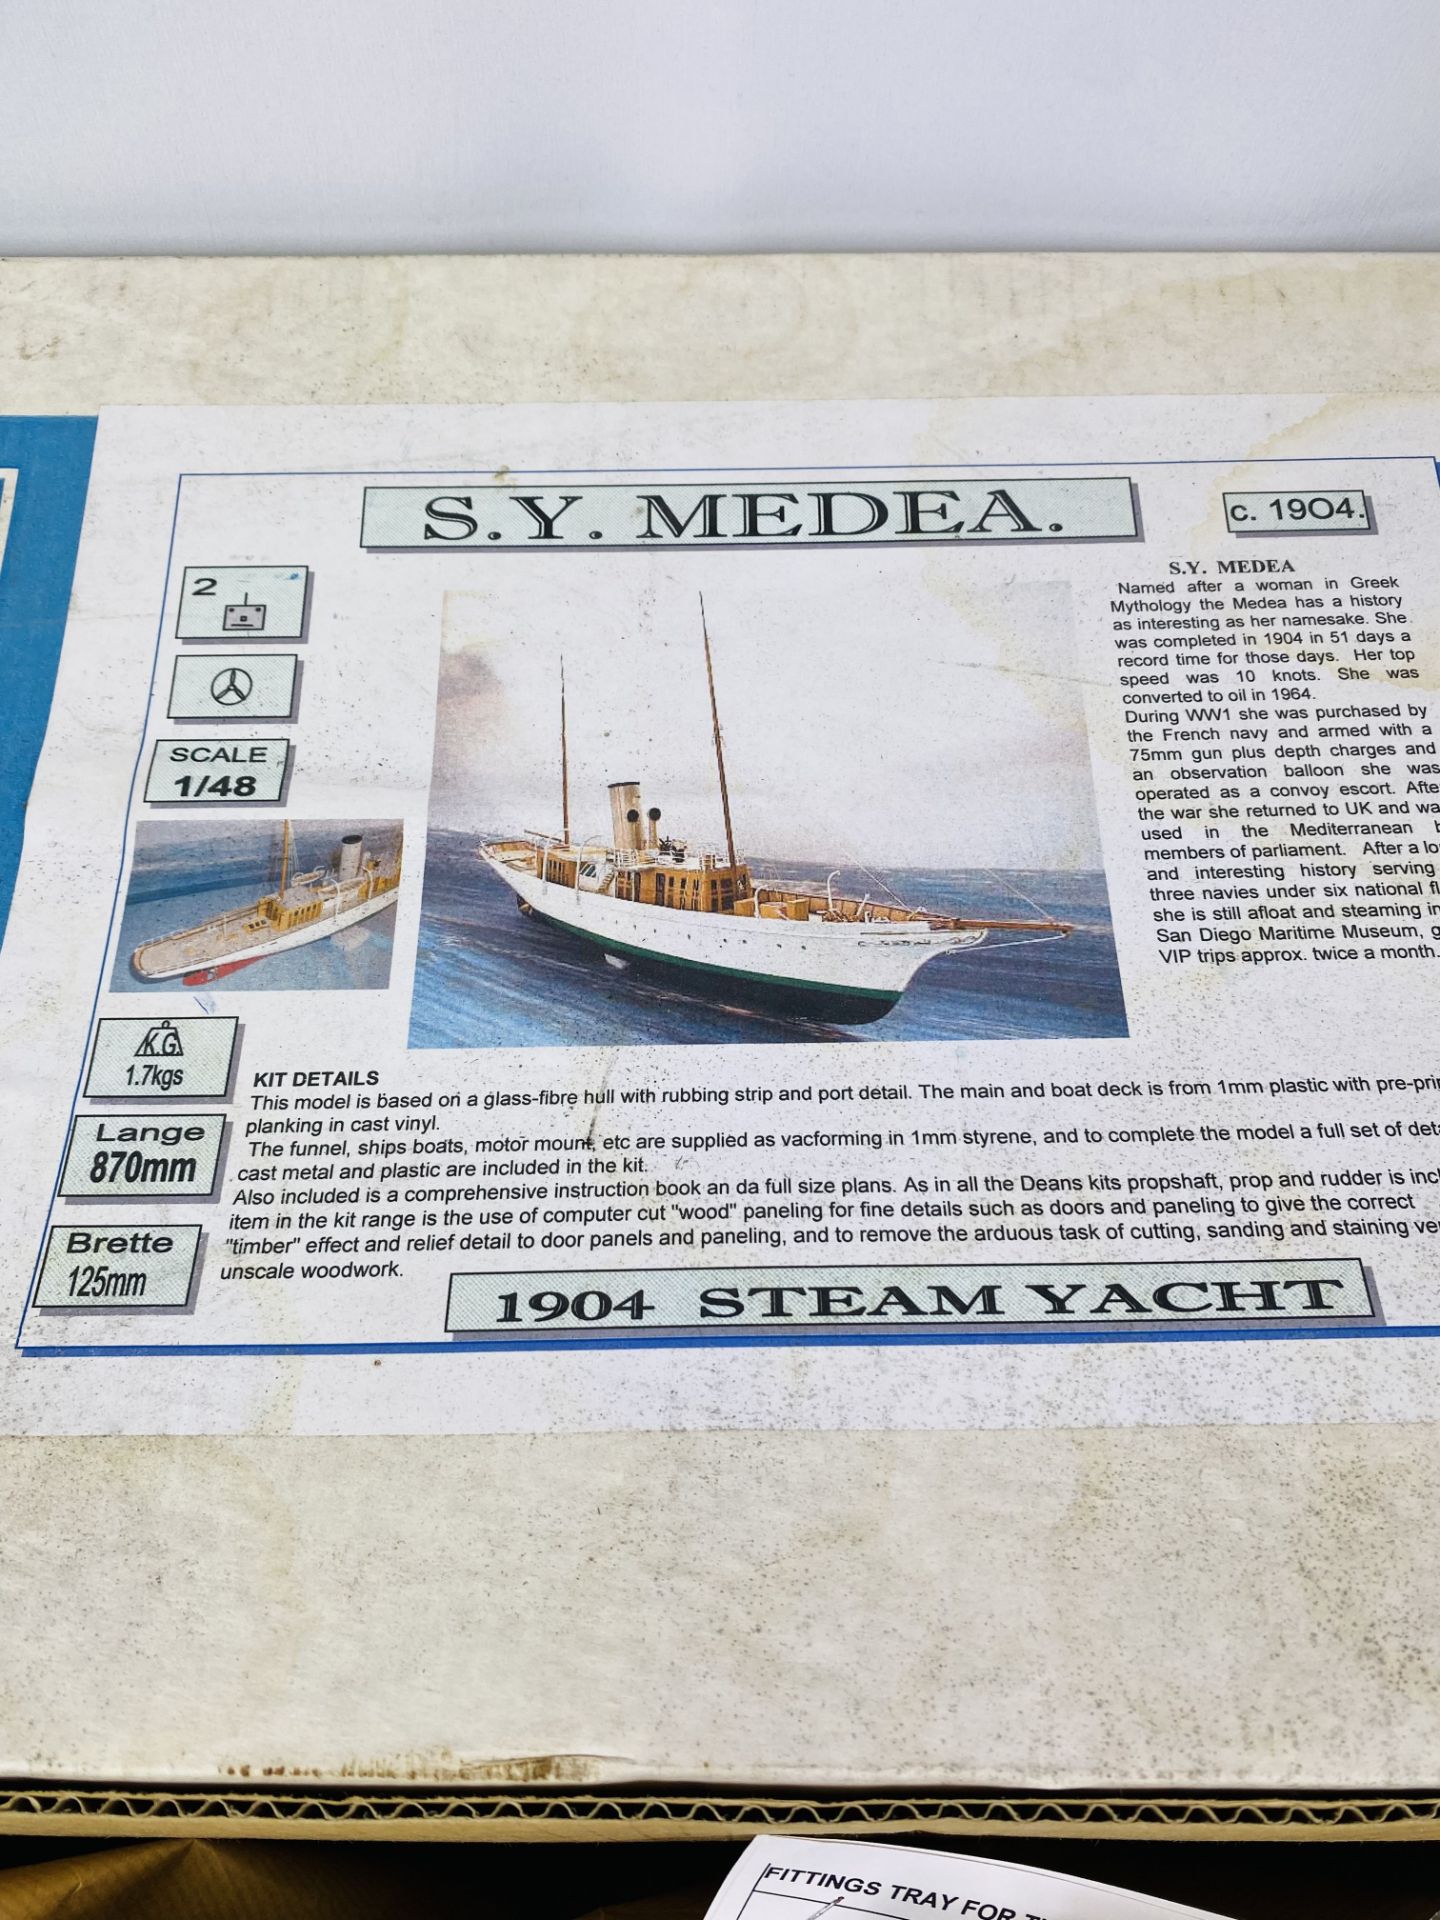 Deans marine 1:48 scale model kit of the 1904 steam yacht Media in original box. - Image 2 of 5